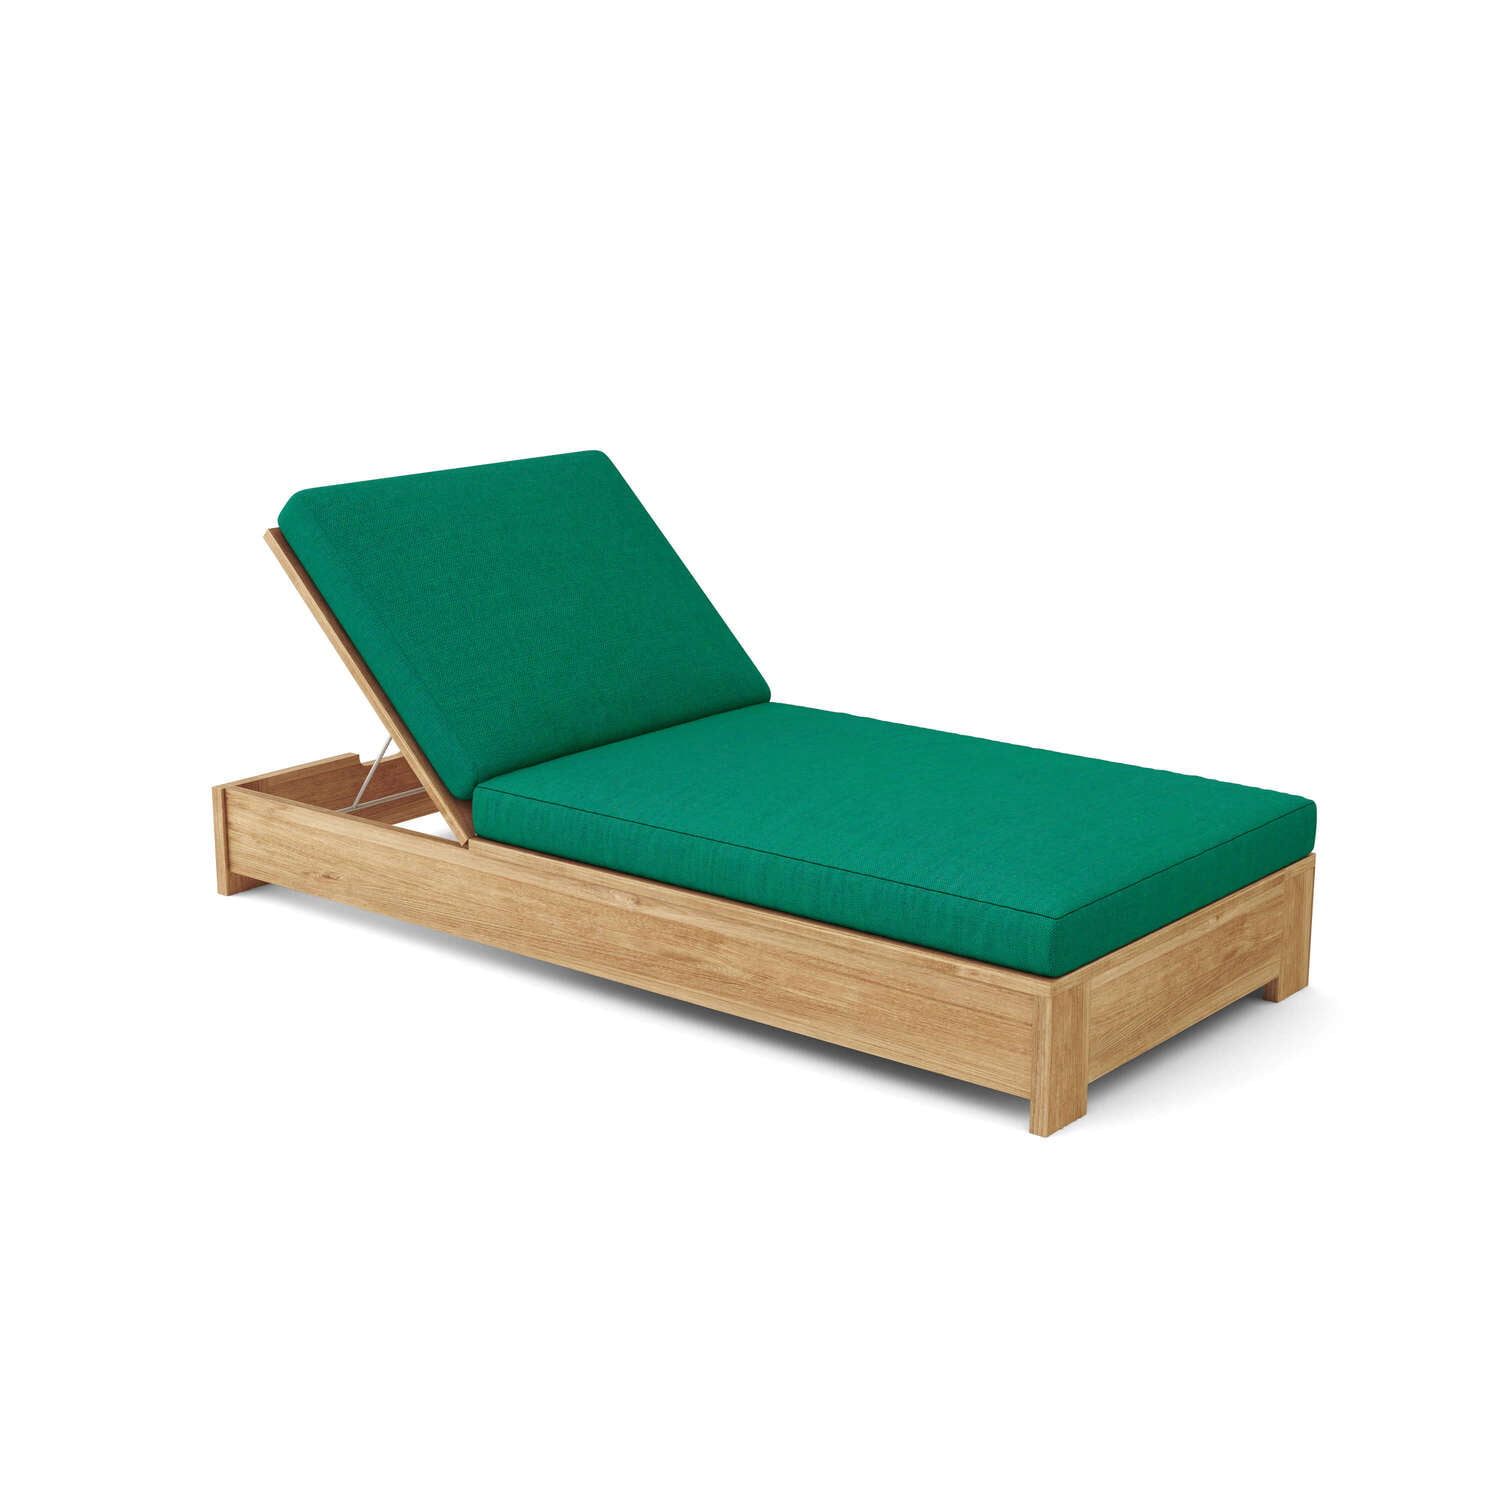 Picture of Anderson Teak SL-529 Madera Sun Lounger, Natural Smooth Well Sanded